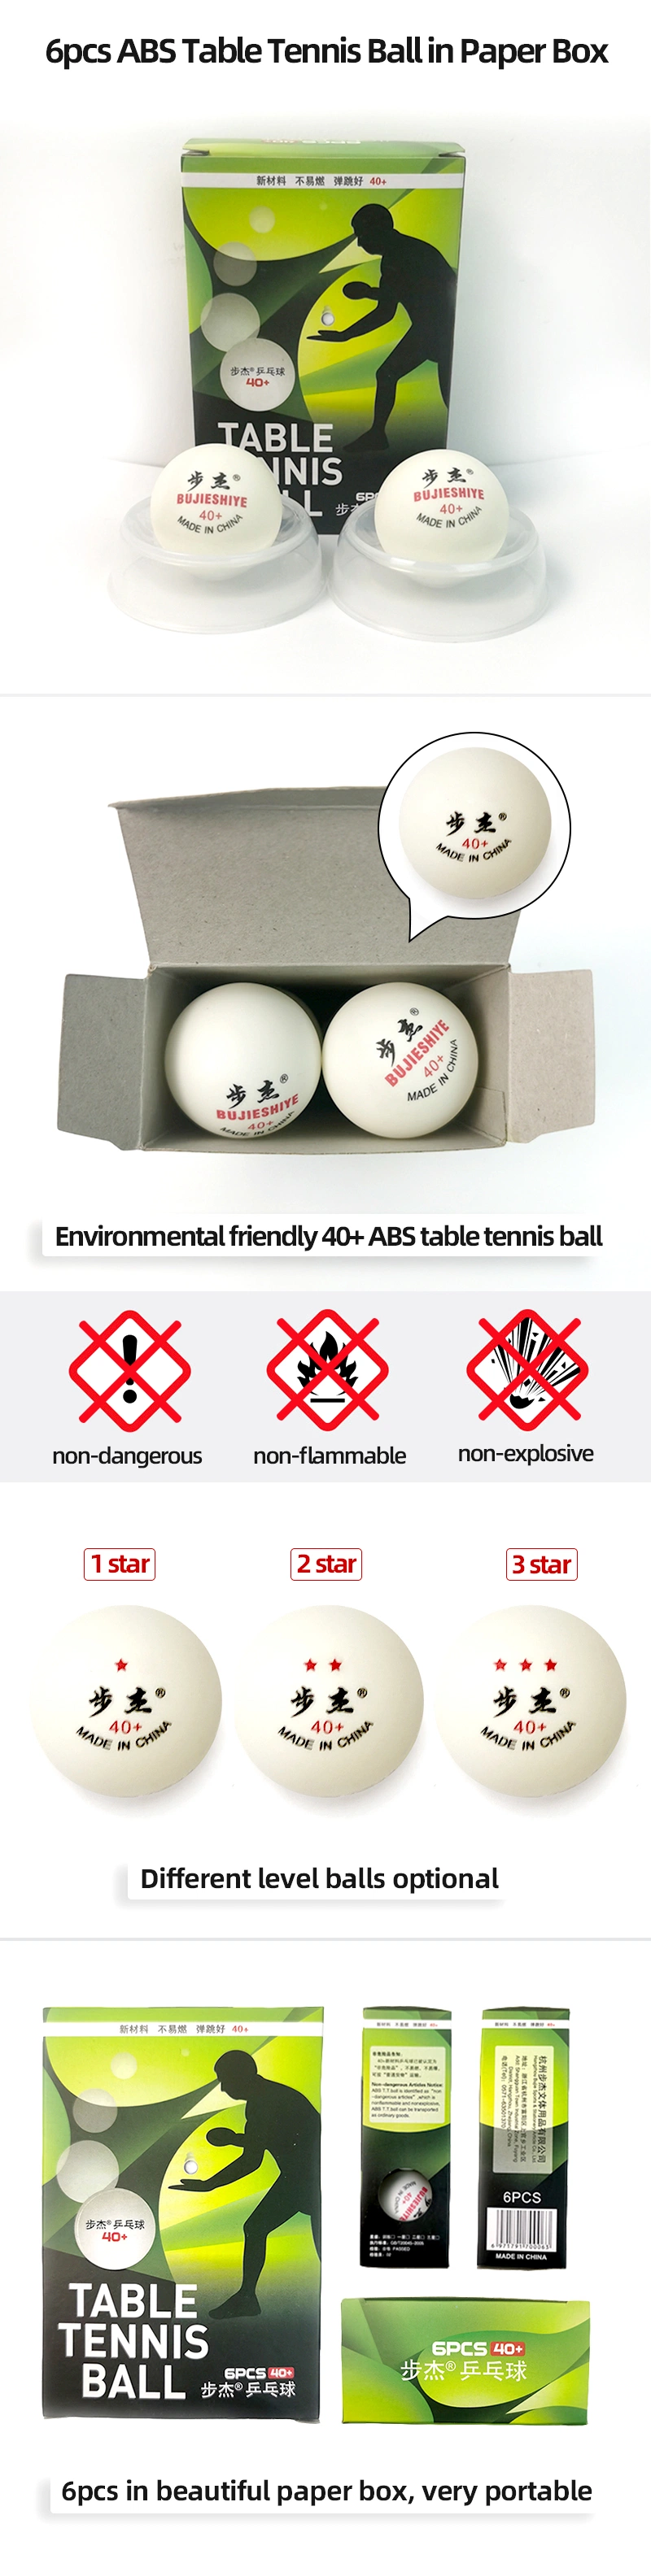 0-3 Star Ping Pong Balls Good Quality ABS 6PCS Pack Table Tennis Balls for Indoor Sport New ABS Material 40+ Balls